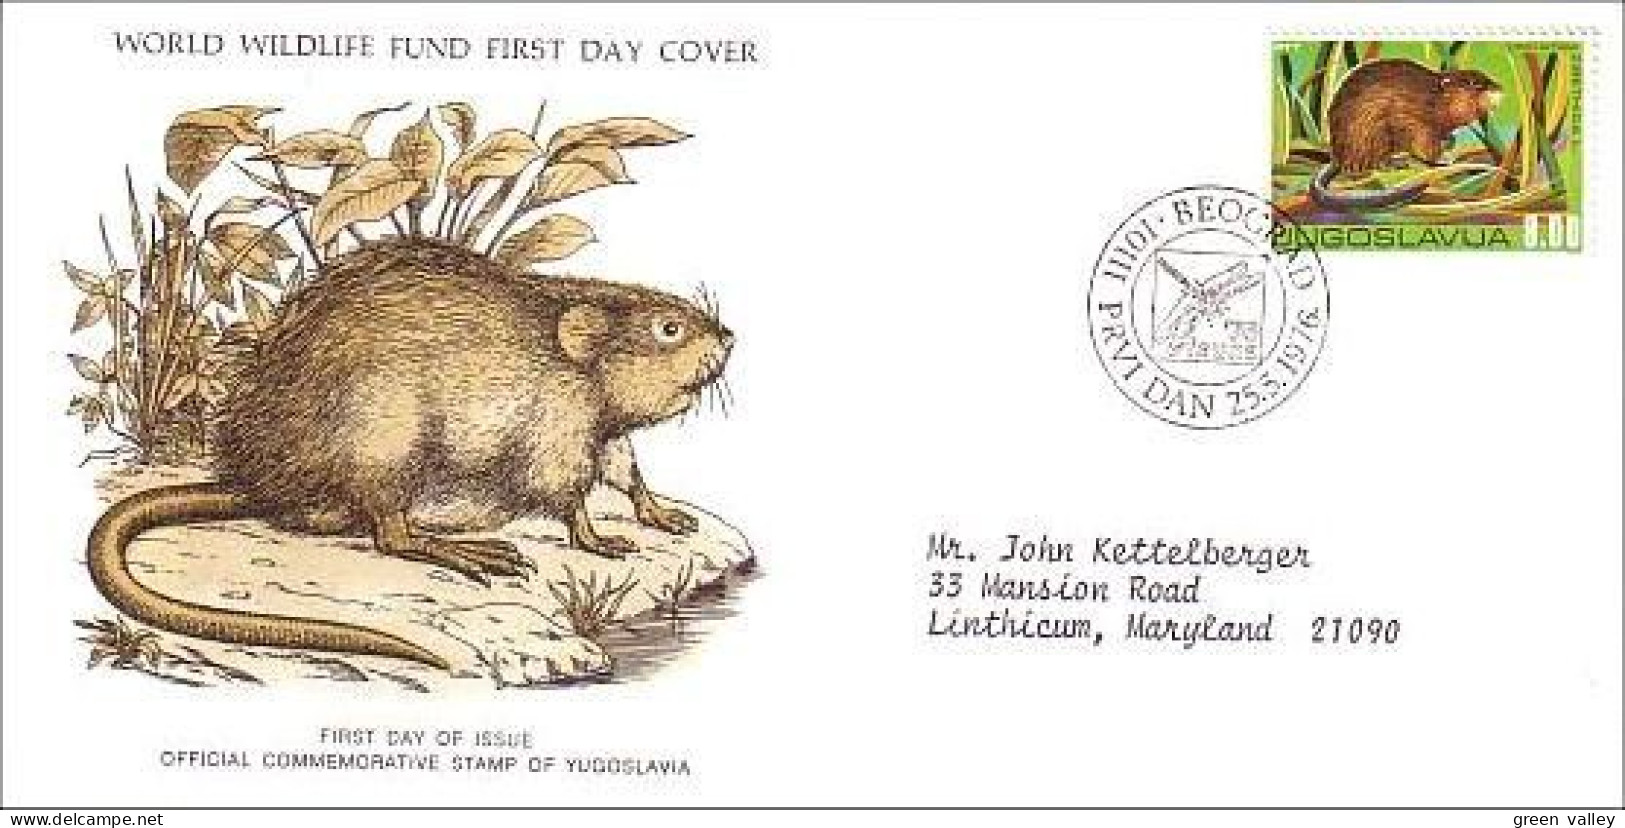 Yougoslavie Rongeur Ondatra Rodent WWF FDC Cover ( A80 99) - Knaagdieren